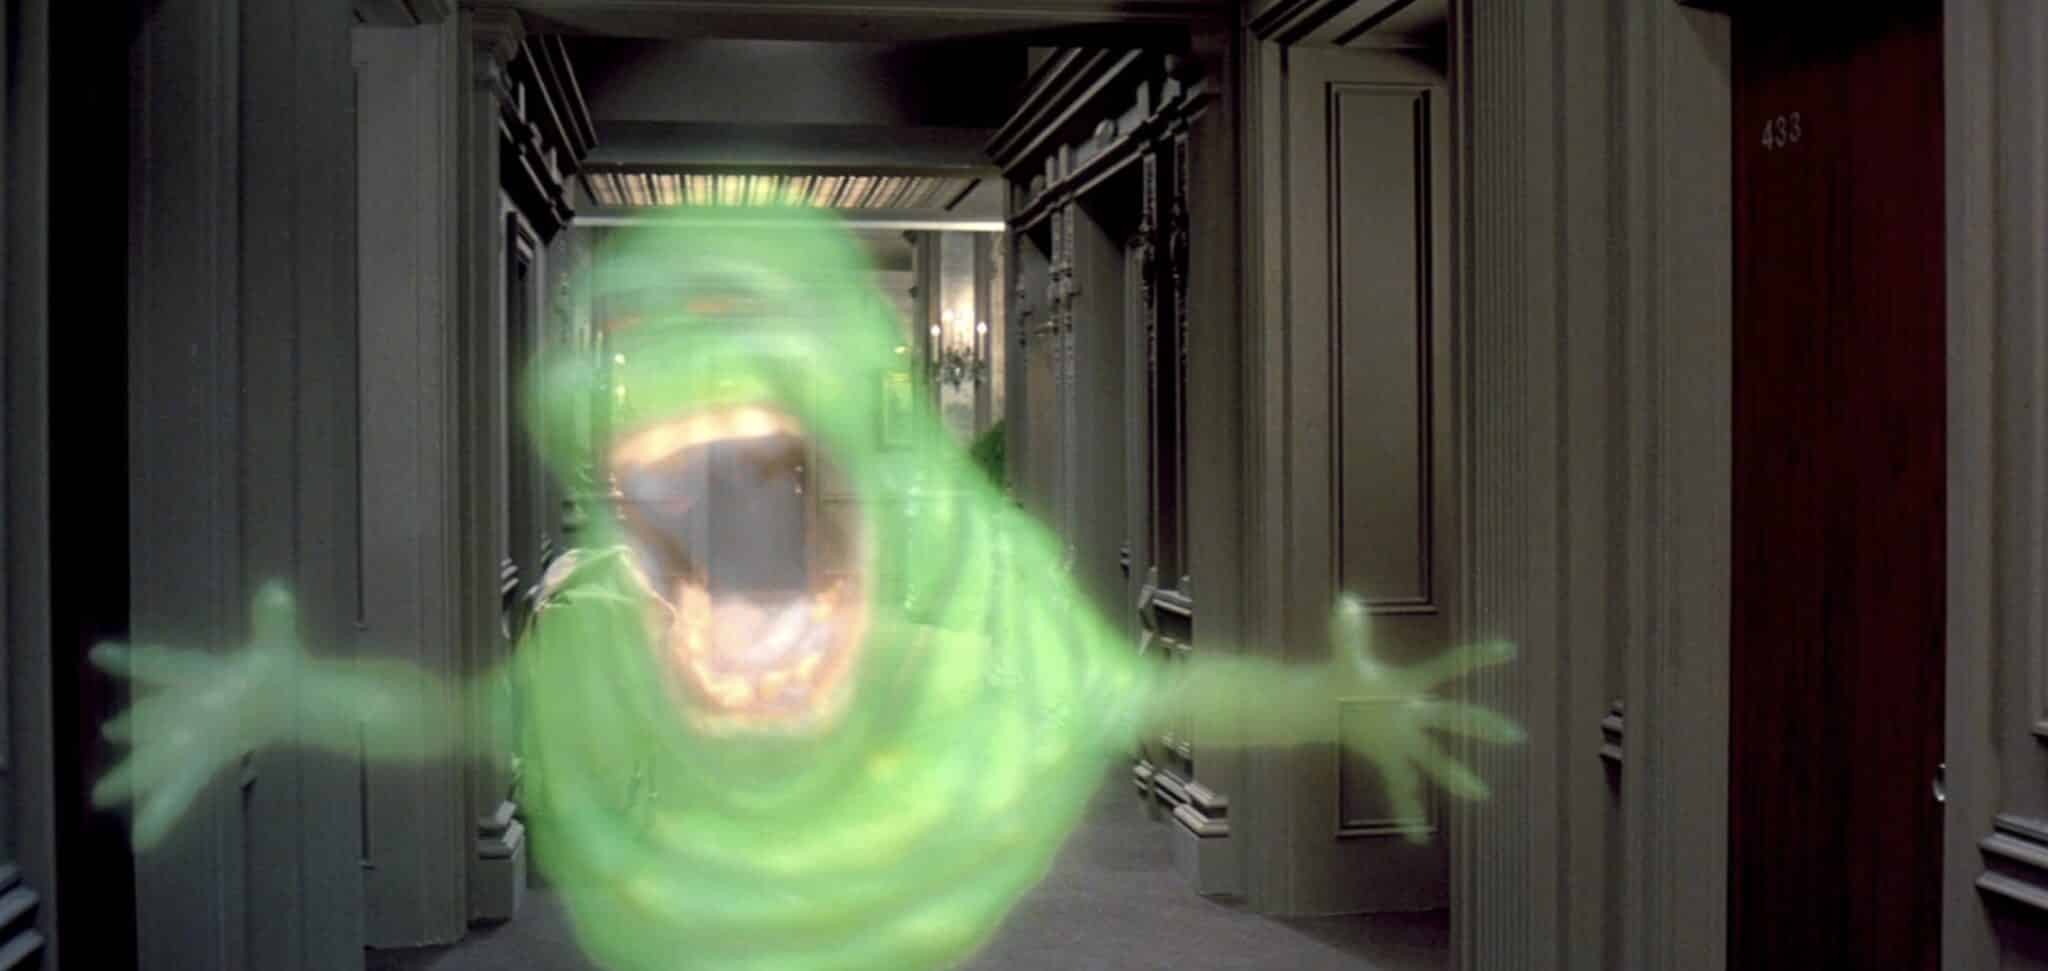 Slimer the ghost in a hallway of the Sedgewick Hotel